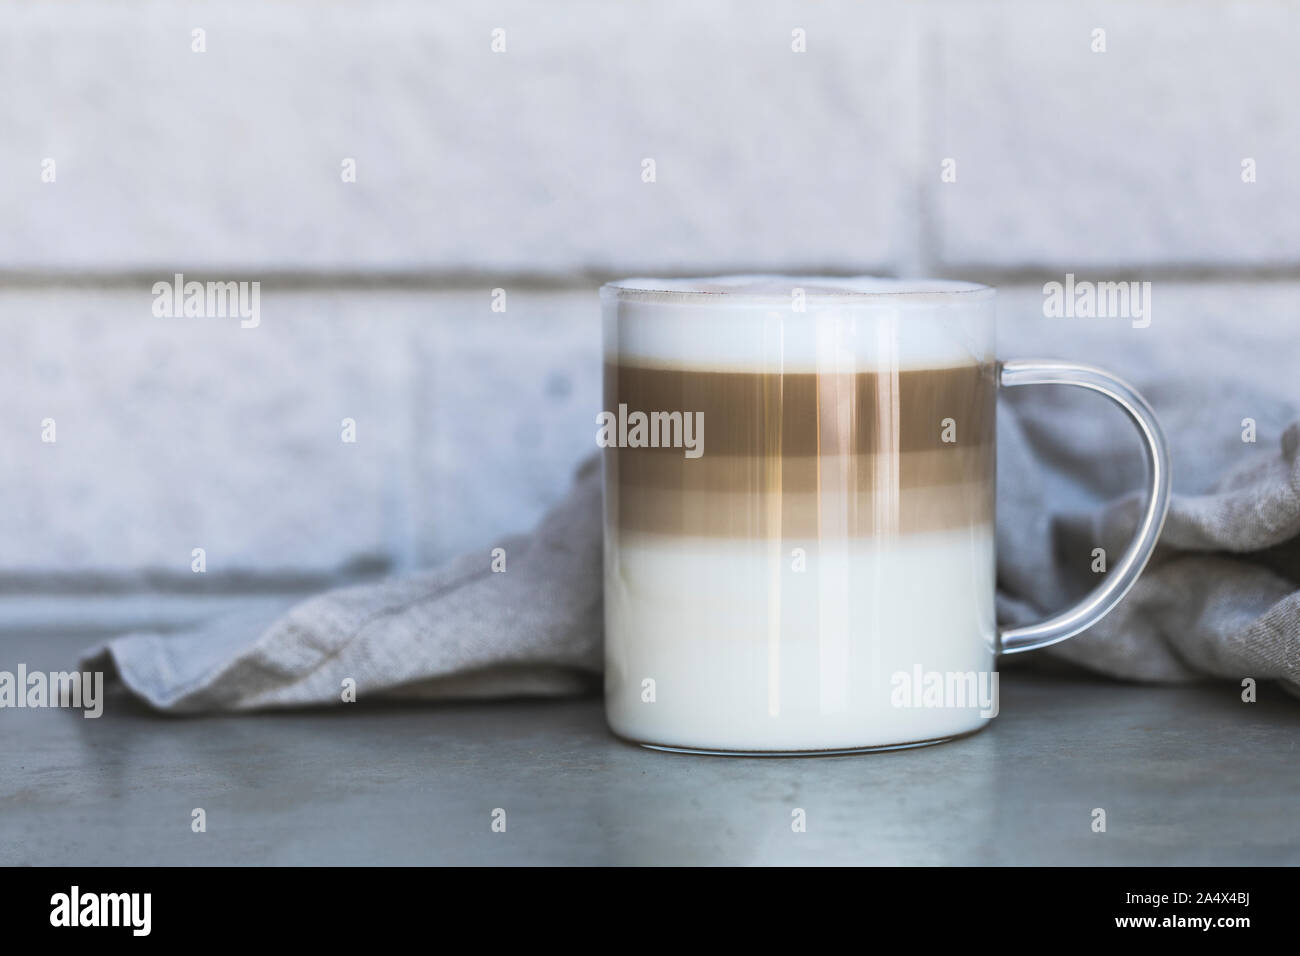 Coffee Cafe Latte Macchiato outdoors in a seethrough glass cup with a rustic gray tile background and a linen napkin. Side view with room for text. Stock Photo